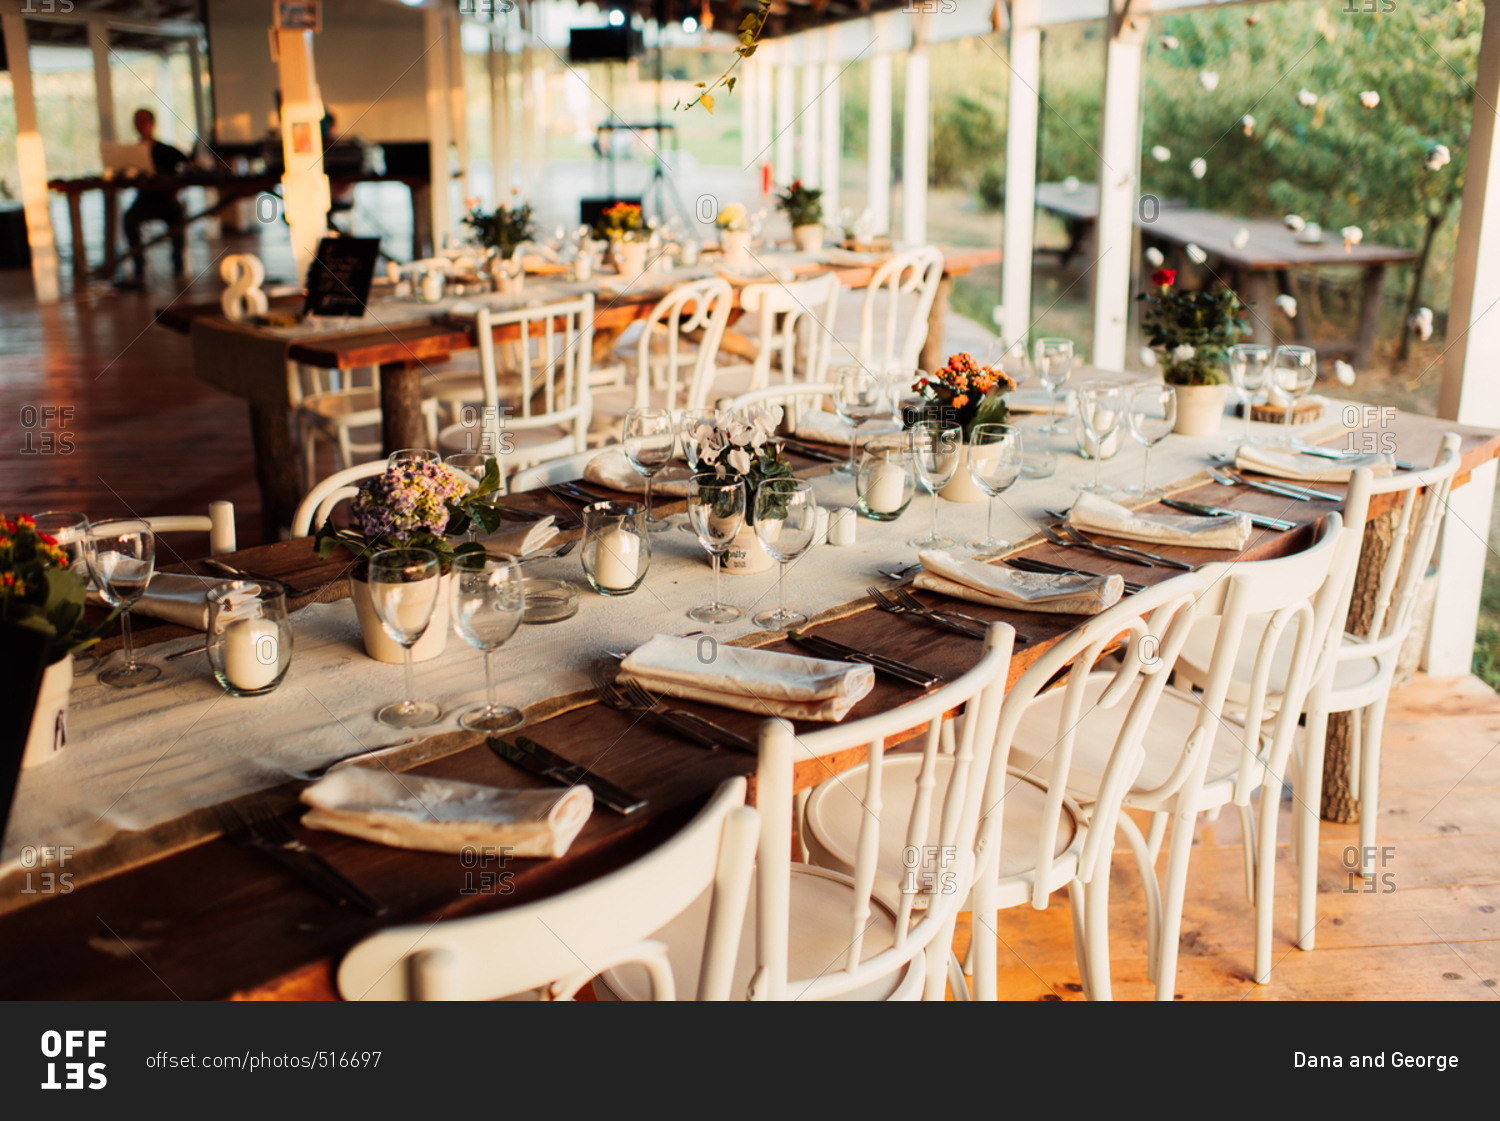 Rustic tables with burlap table runner at a wedding reception